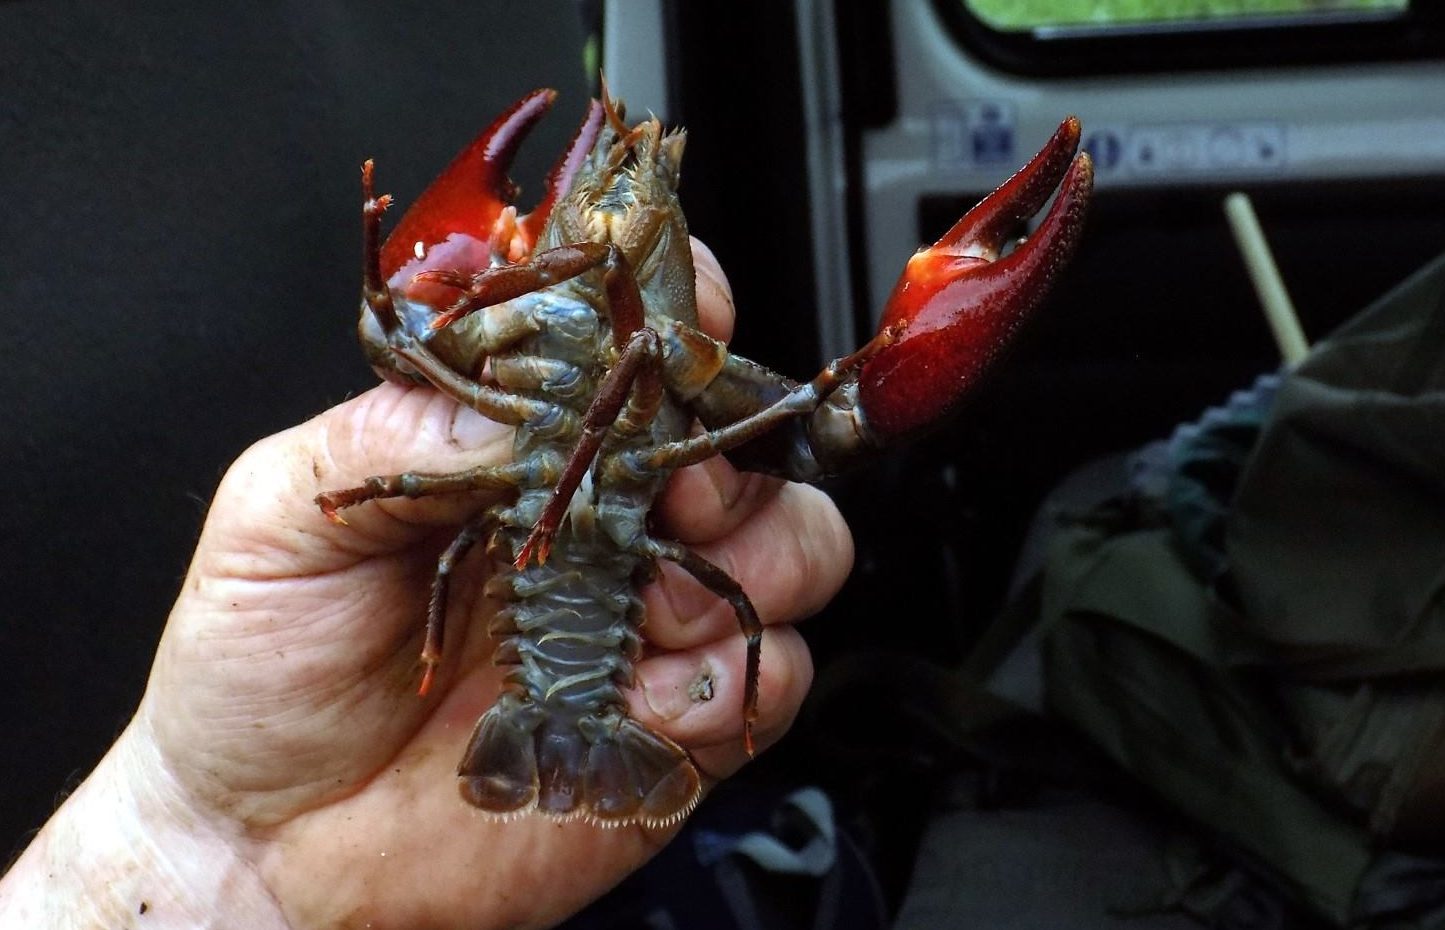 What bait do you use to catch crawfish? - Quora